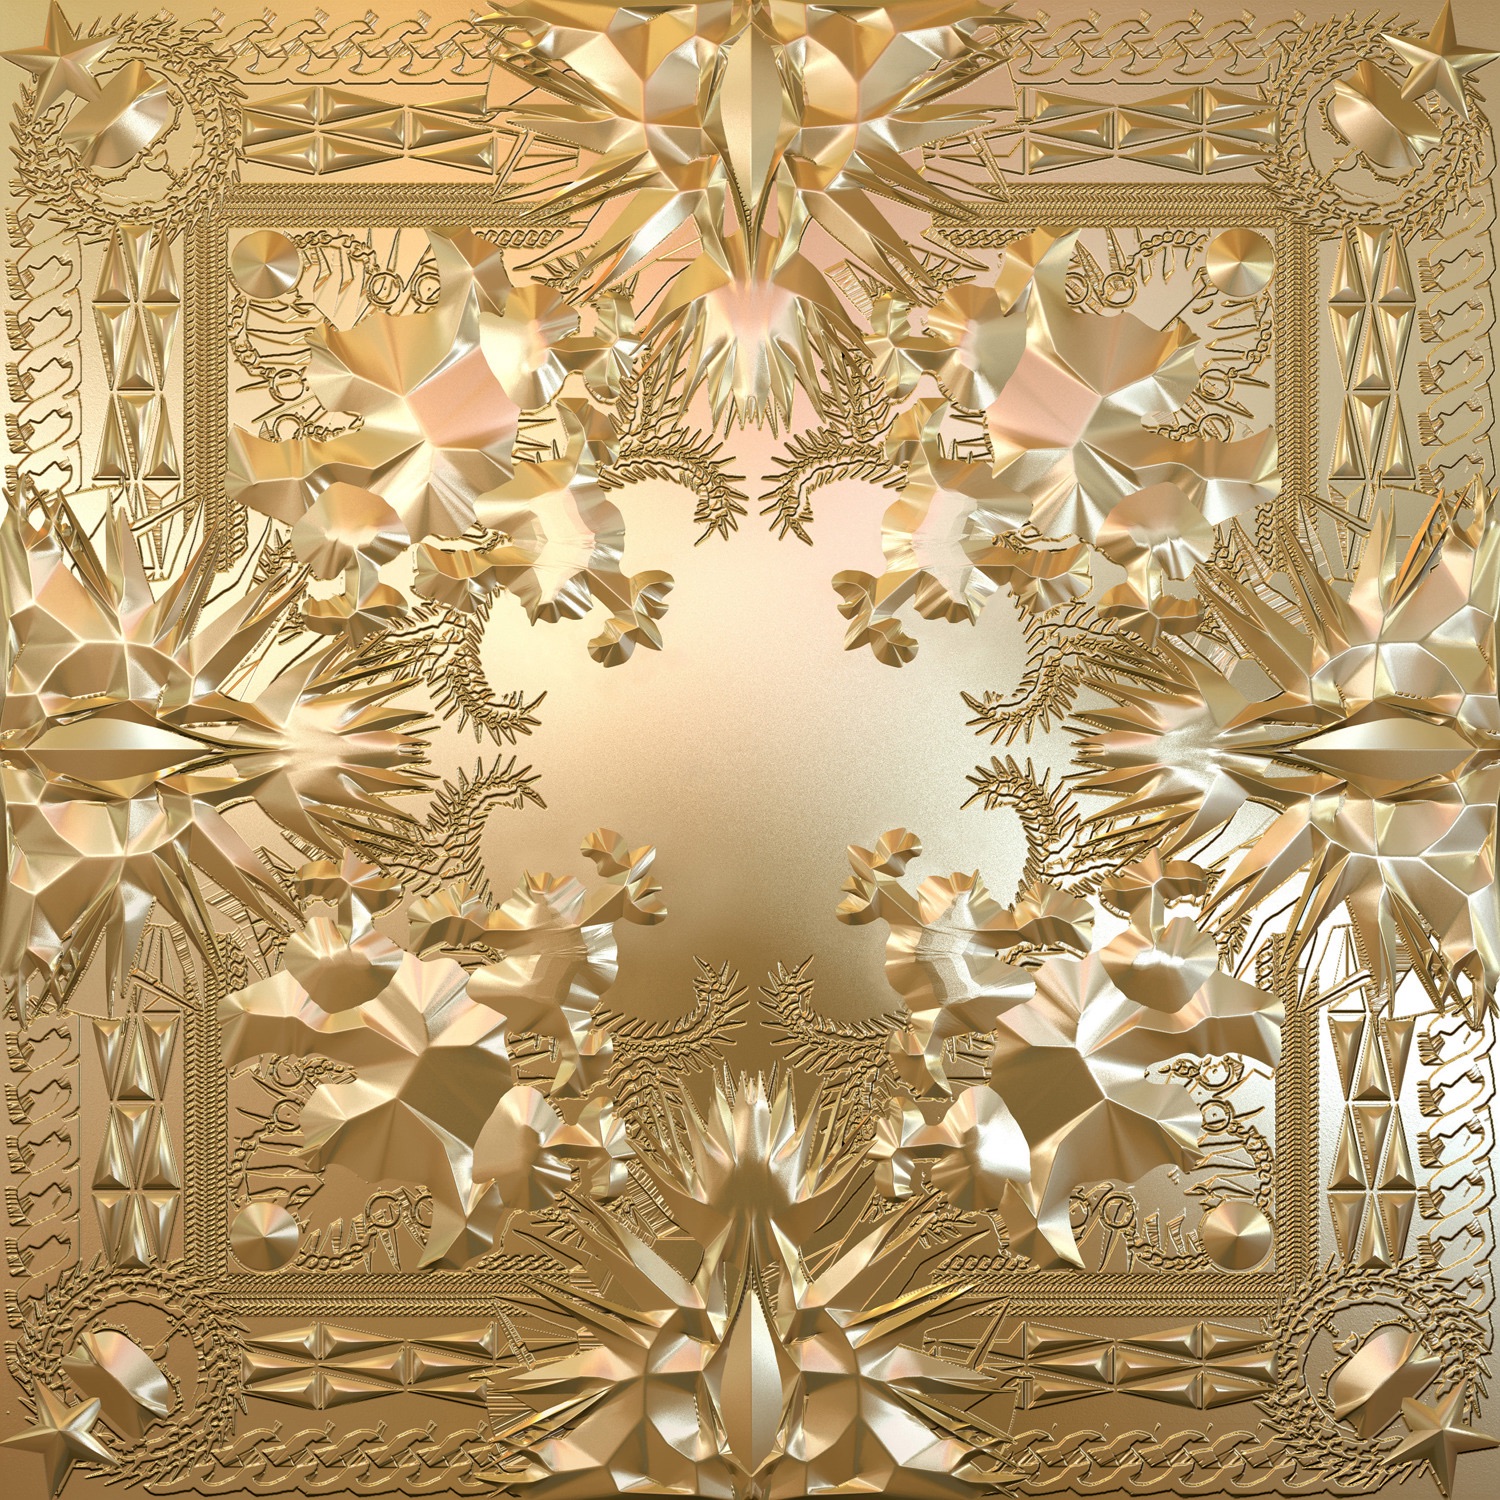 Art for No Church in the Wild (feat. Frank Ocean) by Kanye West & JAY-Z